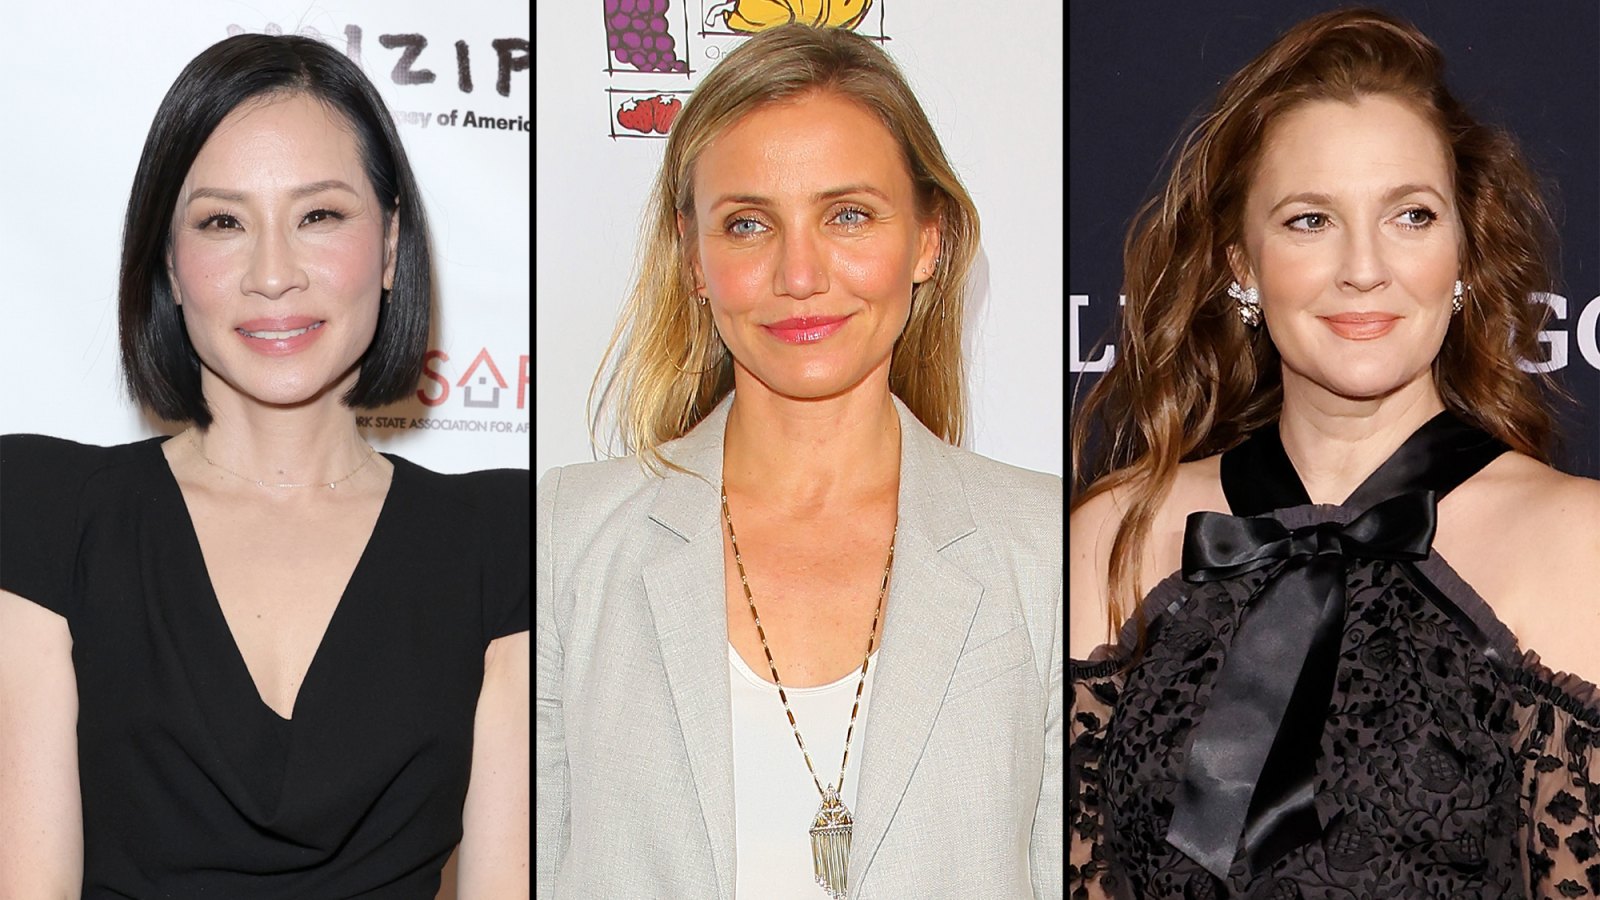 Charlie-s Angels Director McG Teases Sequel With Lucy Liu Cameron Diaz and Drew Barrymore